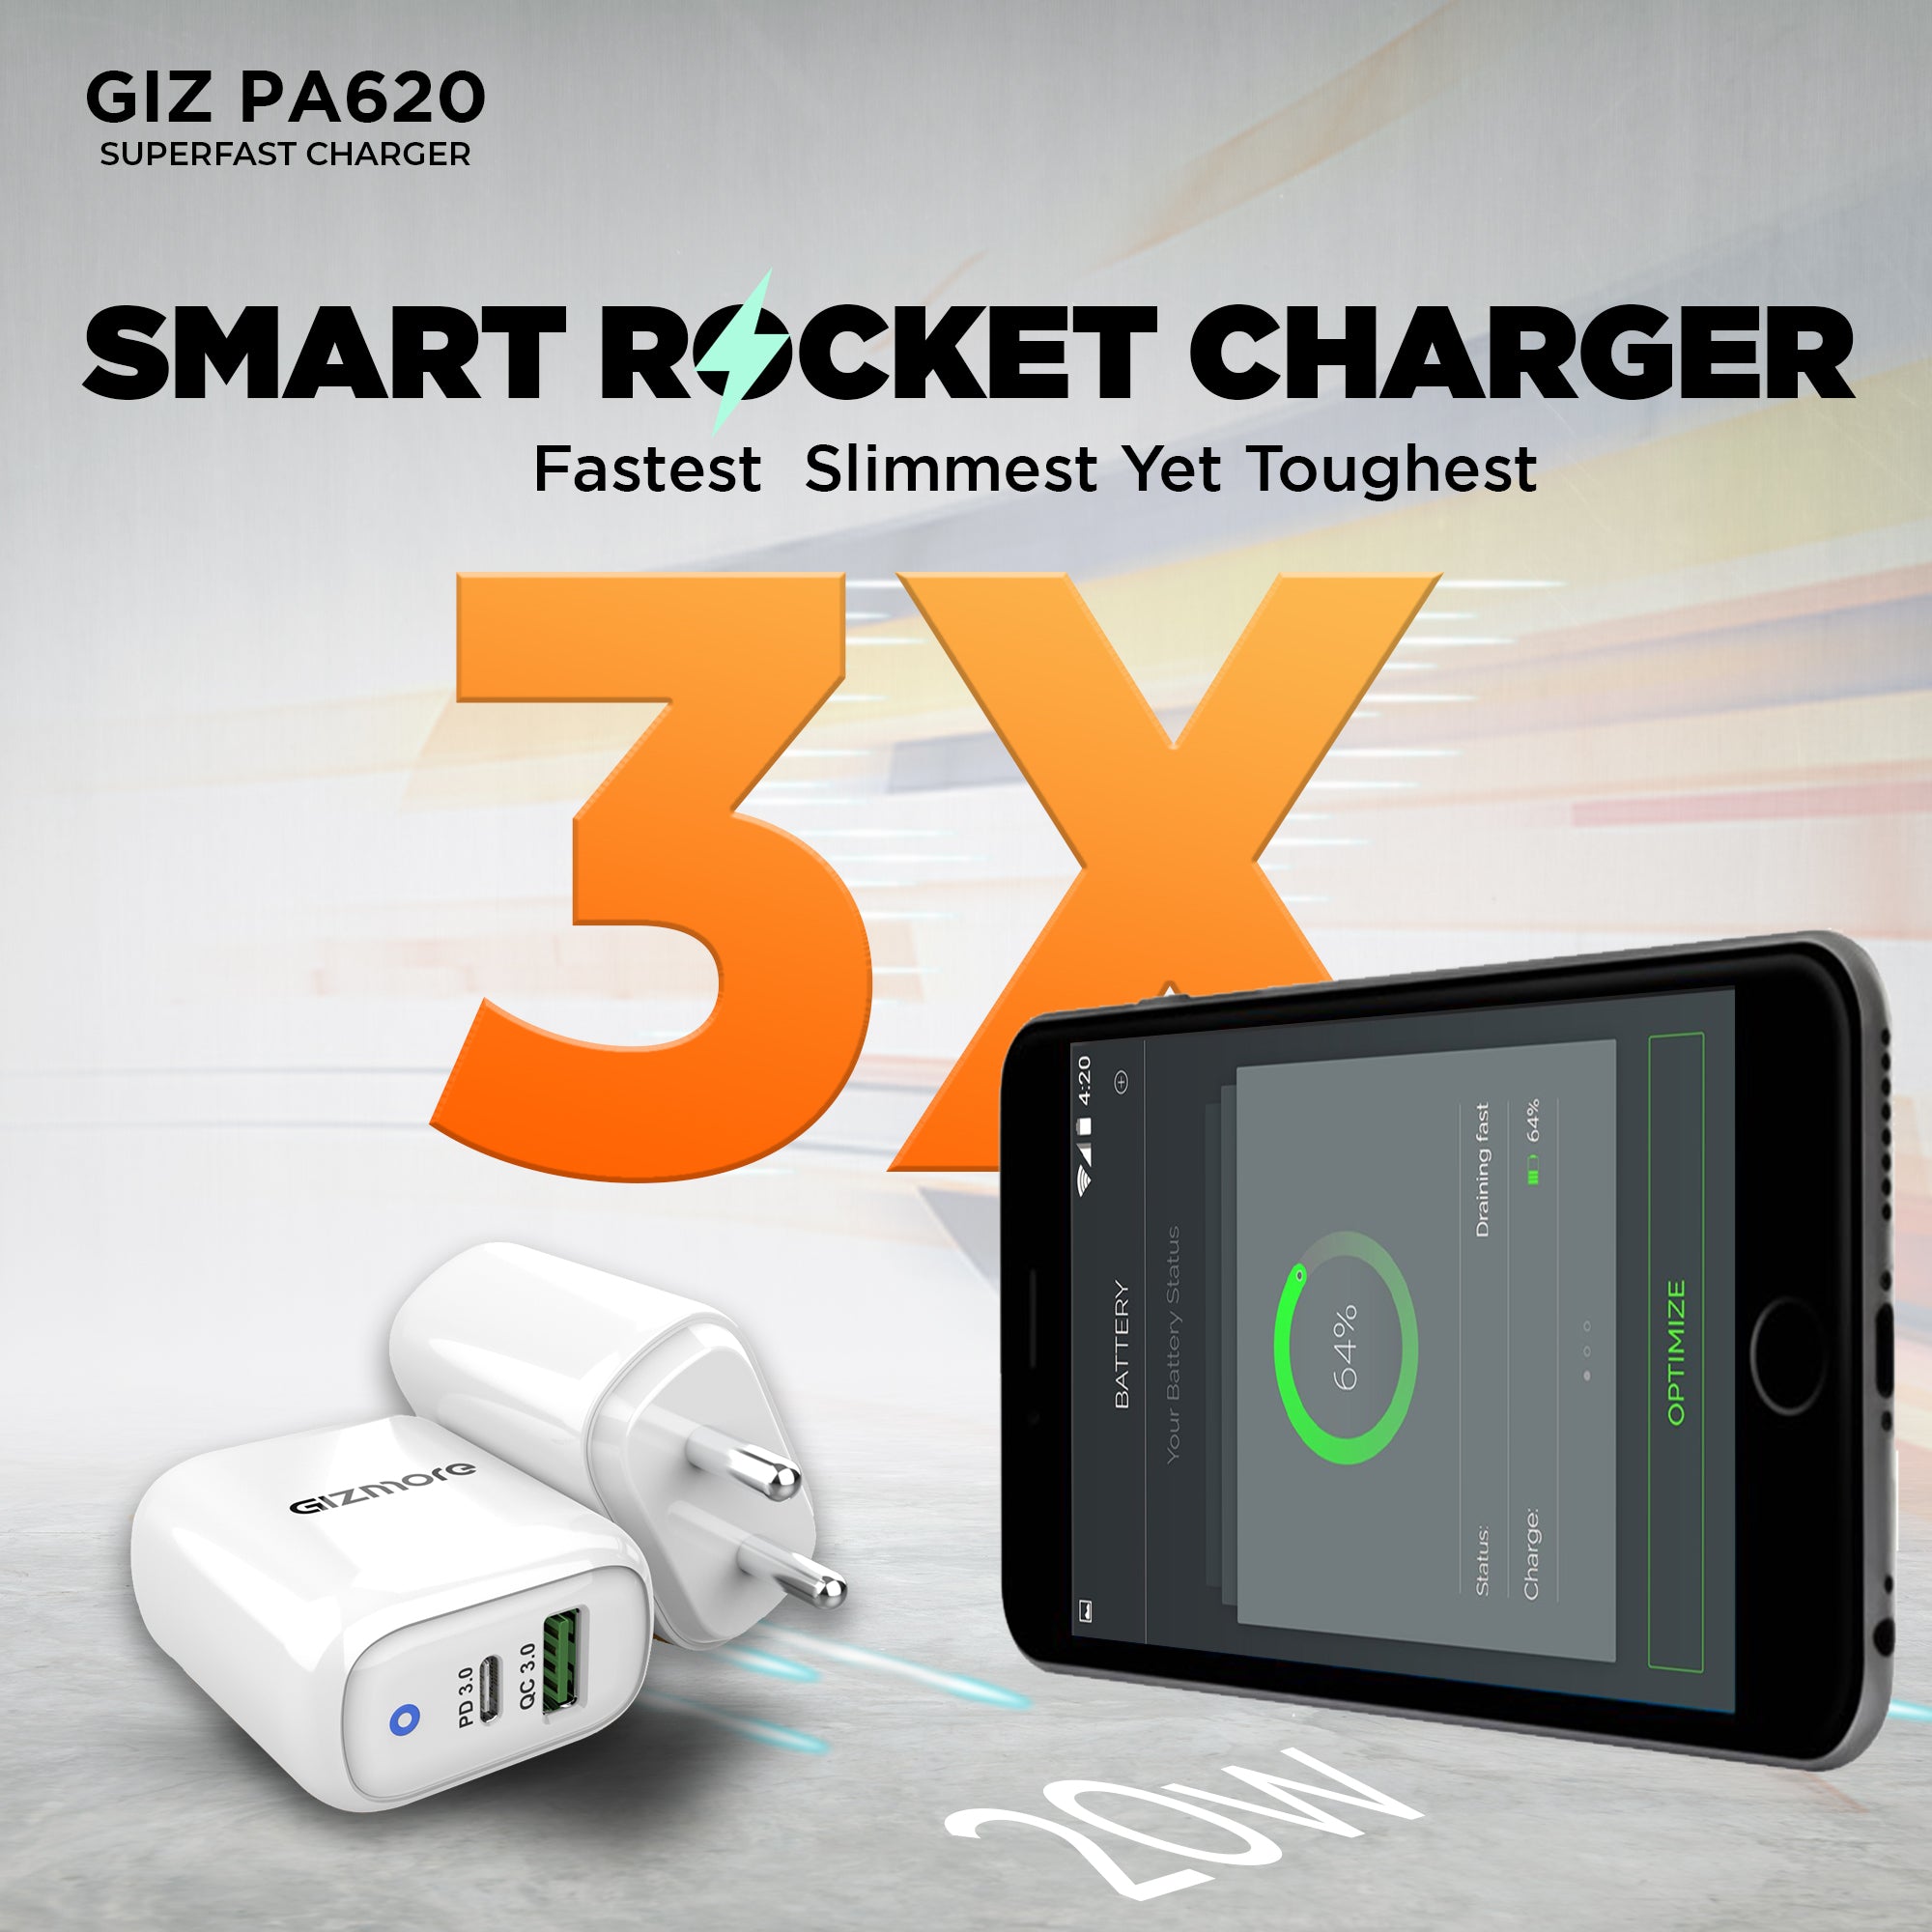 Gizmore 20W Charger|GIZ PA620|3.1A Output |QC & PD support Fast Charger| Multiport Universal Charger with OVP & OCP Protection| 1M Type C detachable Cable included with Charger(White, Cable Included)